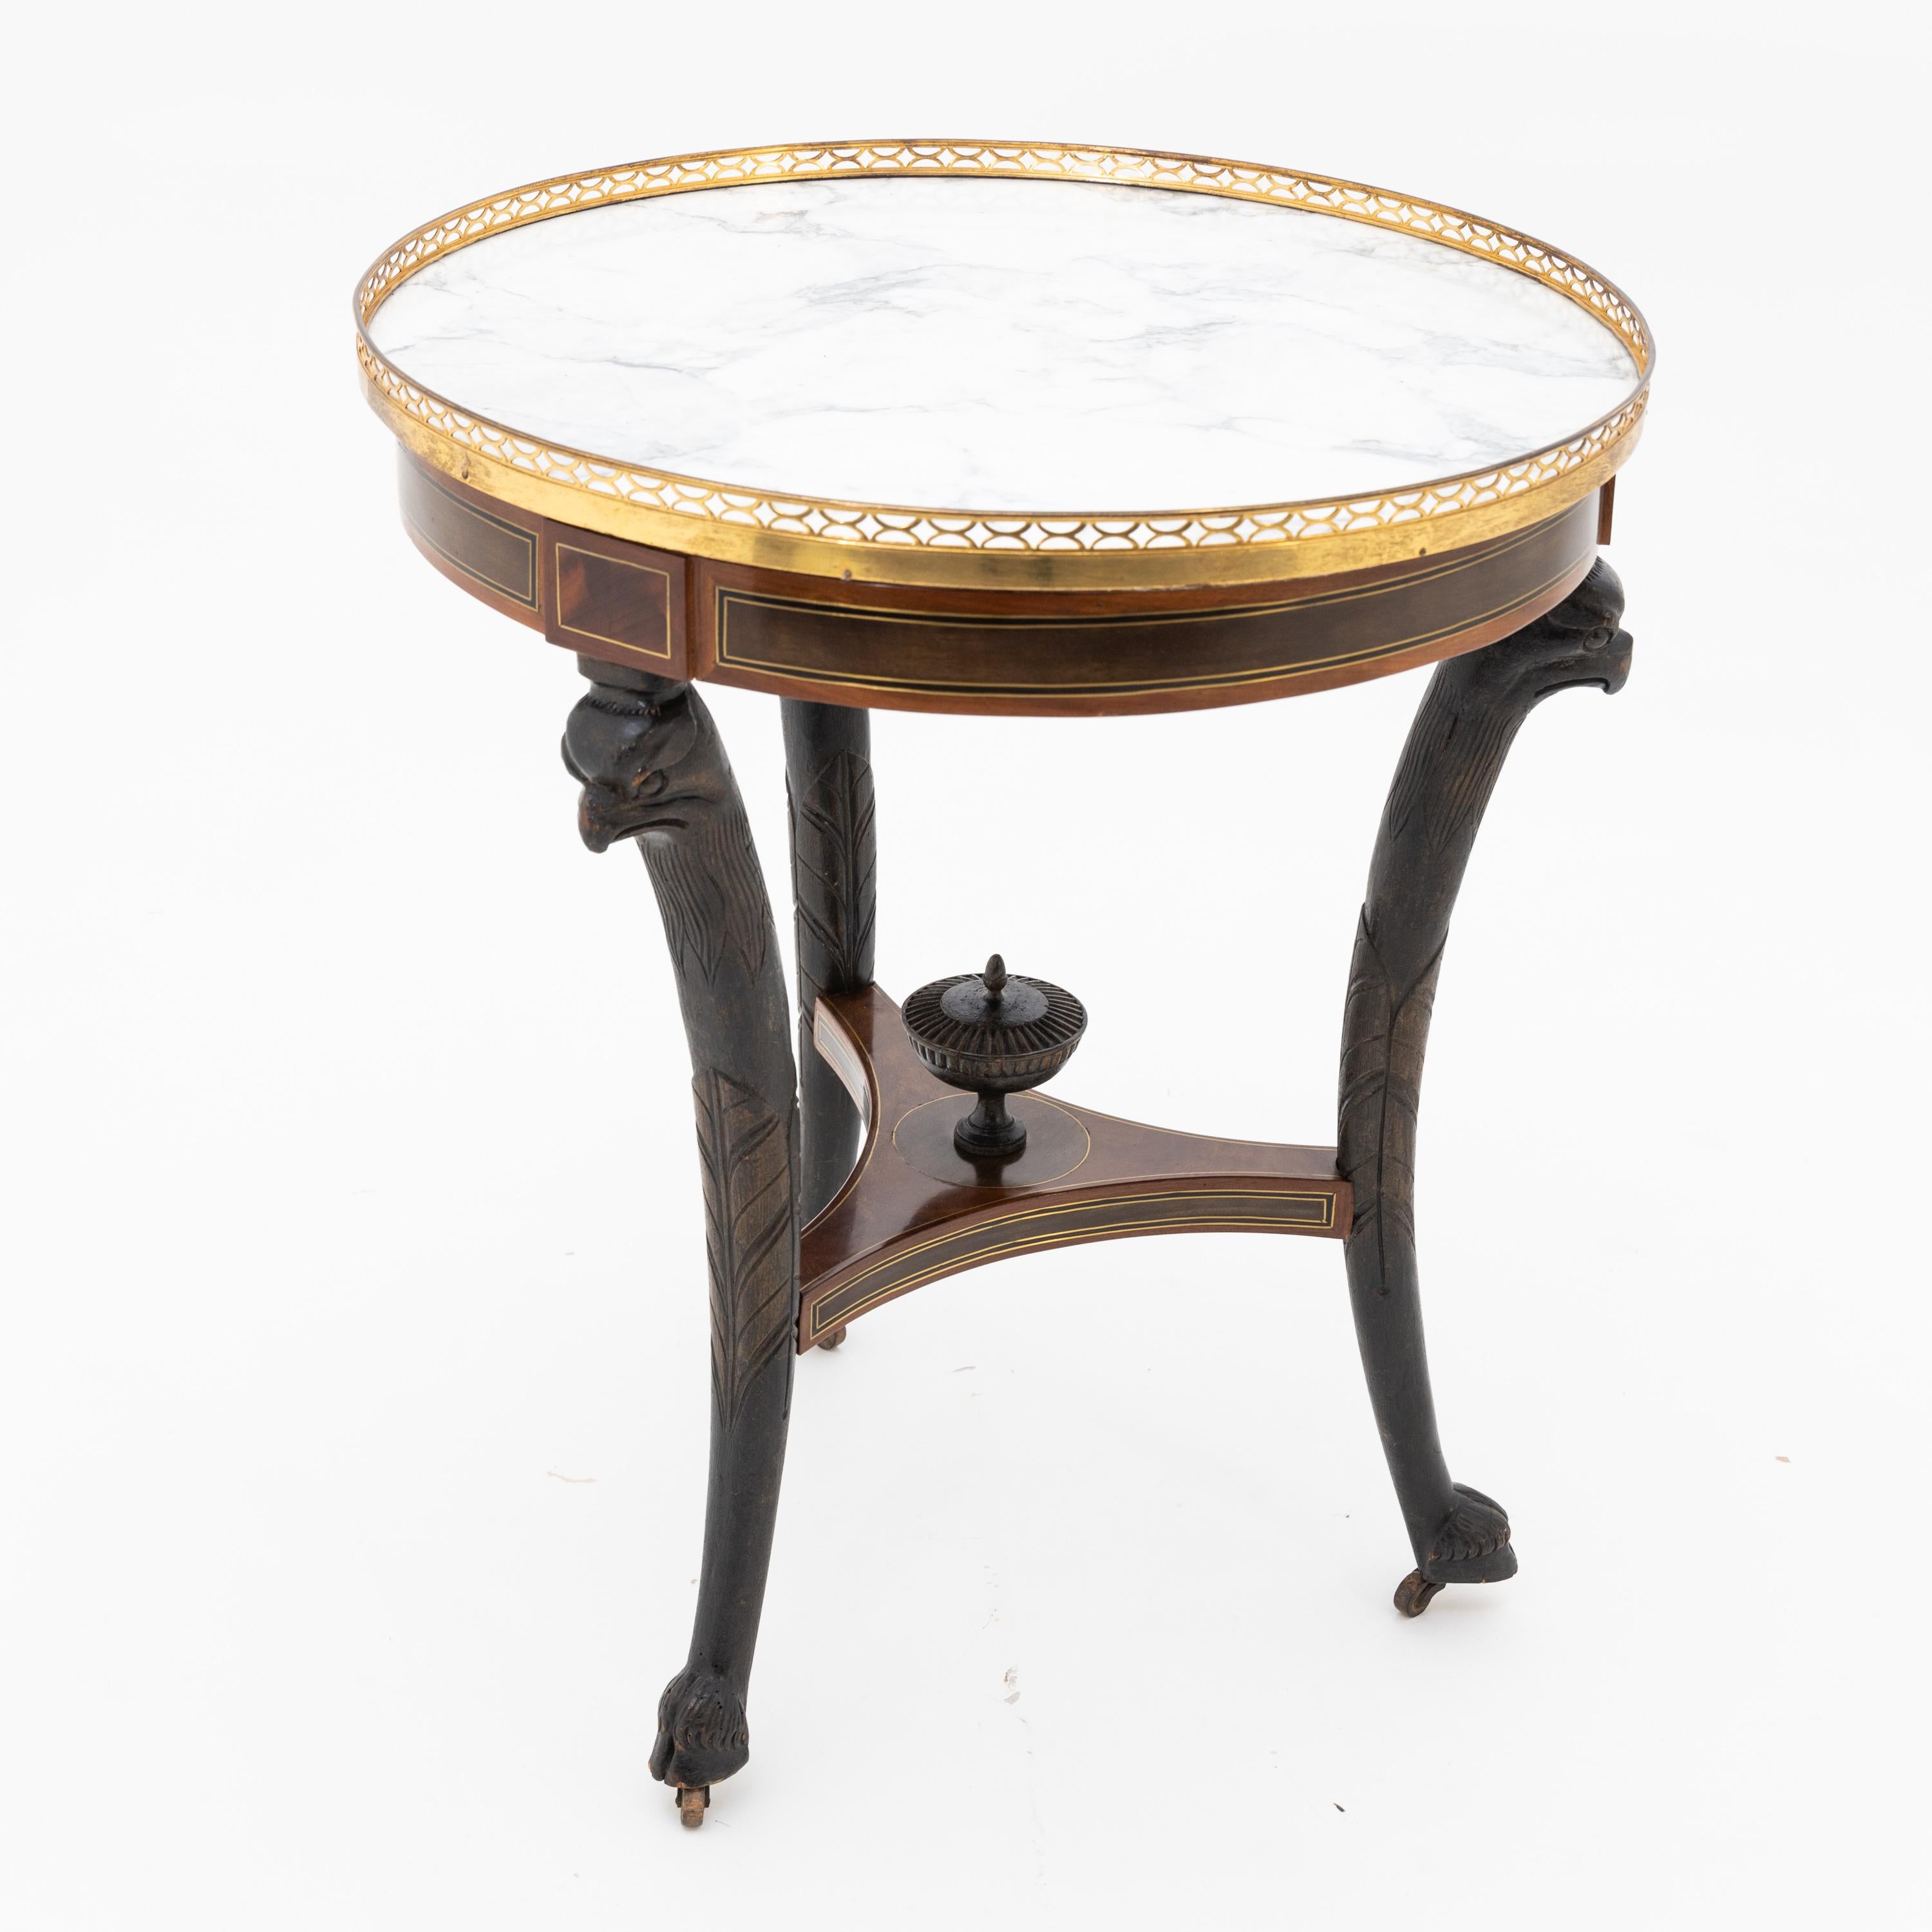 Three-legged table on casters with carved eagle heads and hooves as well as amphora decoration on the trefoil strutting. This, like the frame, is inlaid with brass threads. A low gallery surrounds the white marble tabletop. Mahogany veneered,